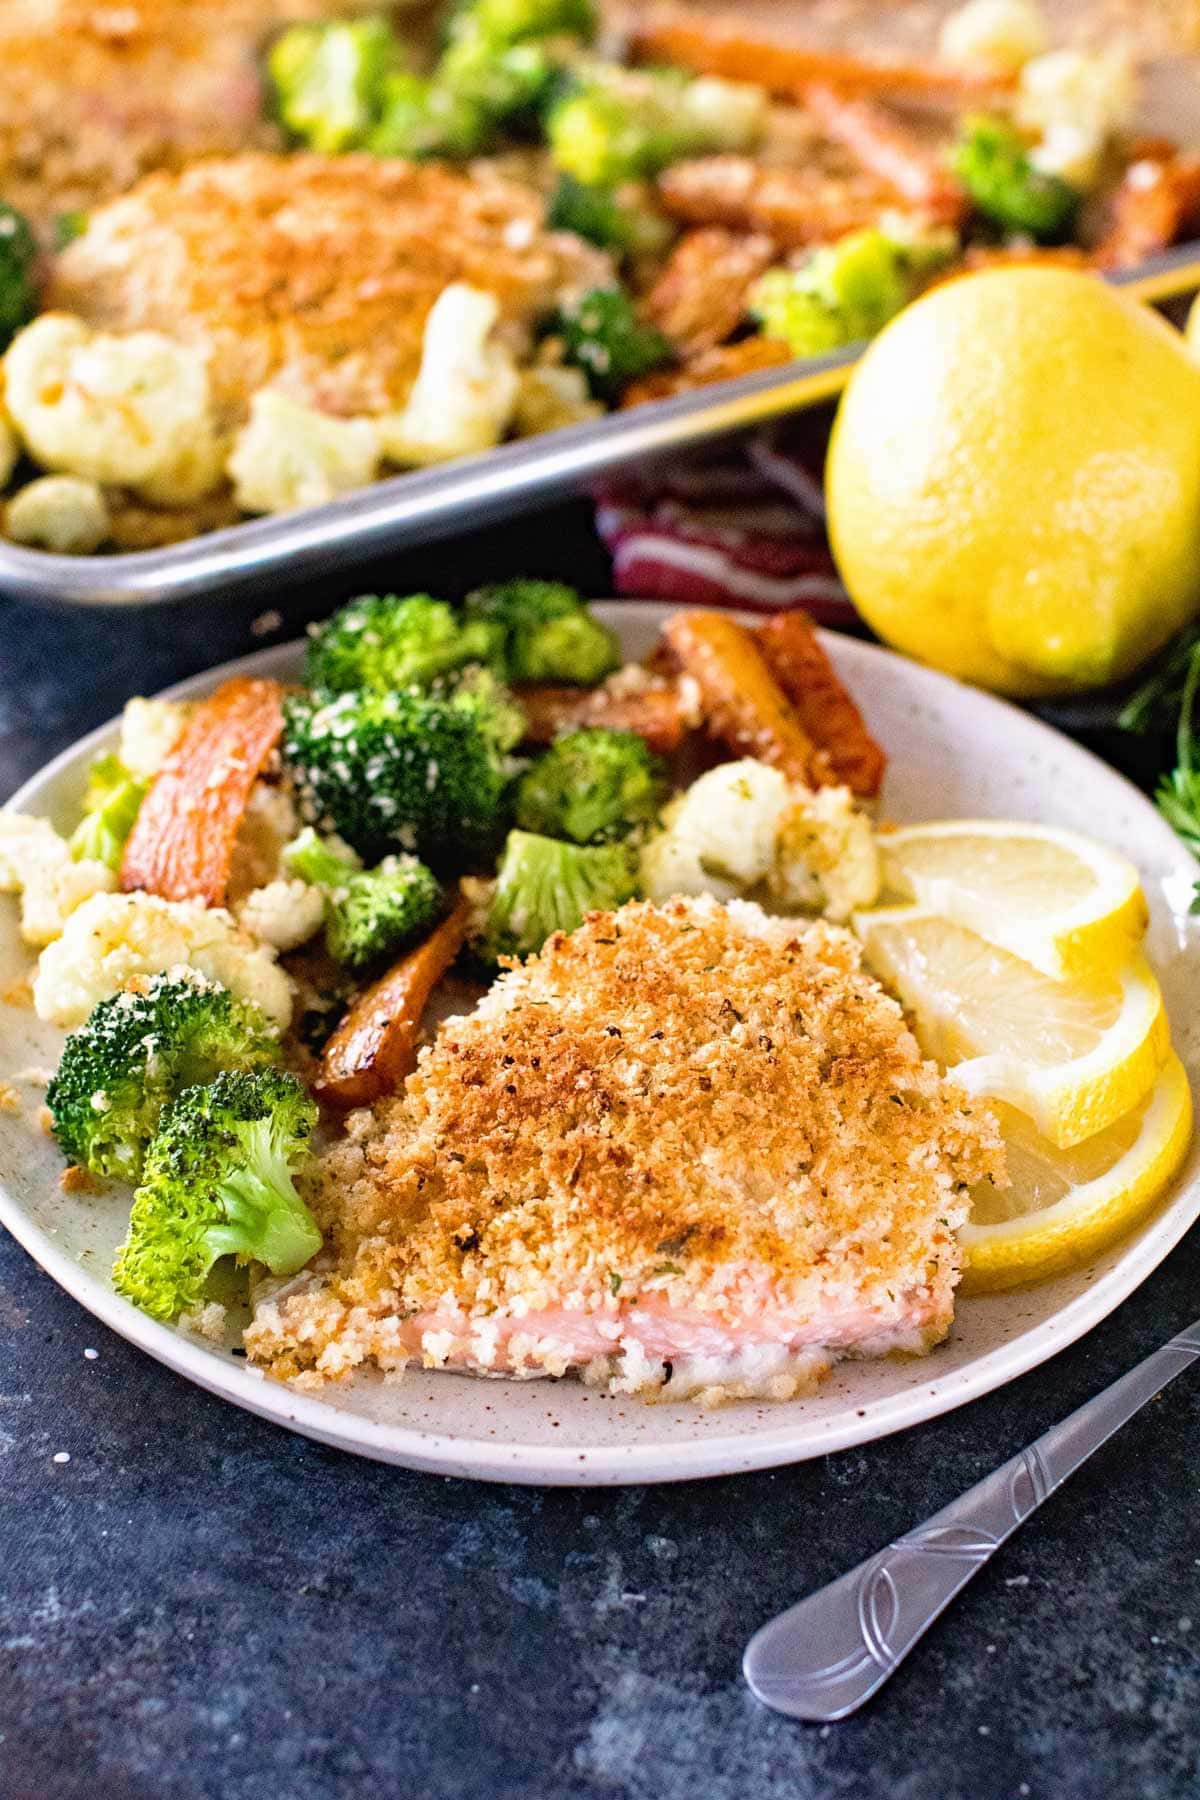 Delicious and Easy Dinner of Lemon Salmon and Vegetables